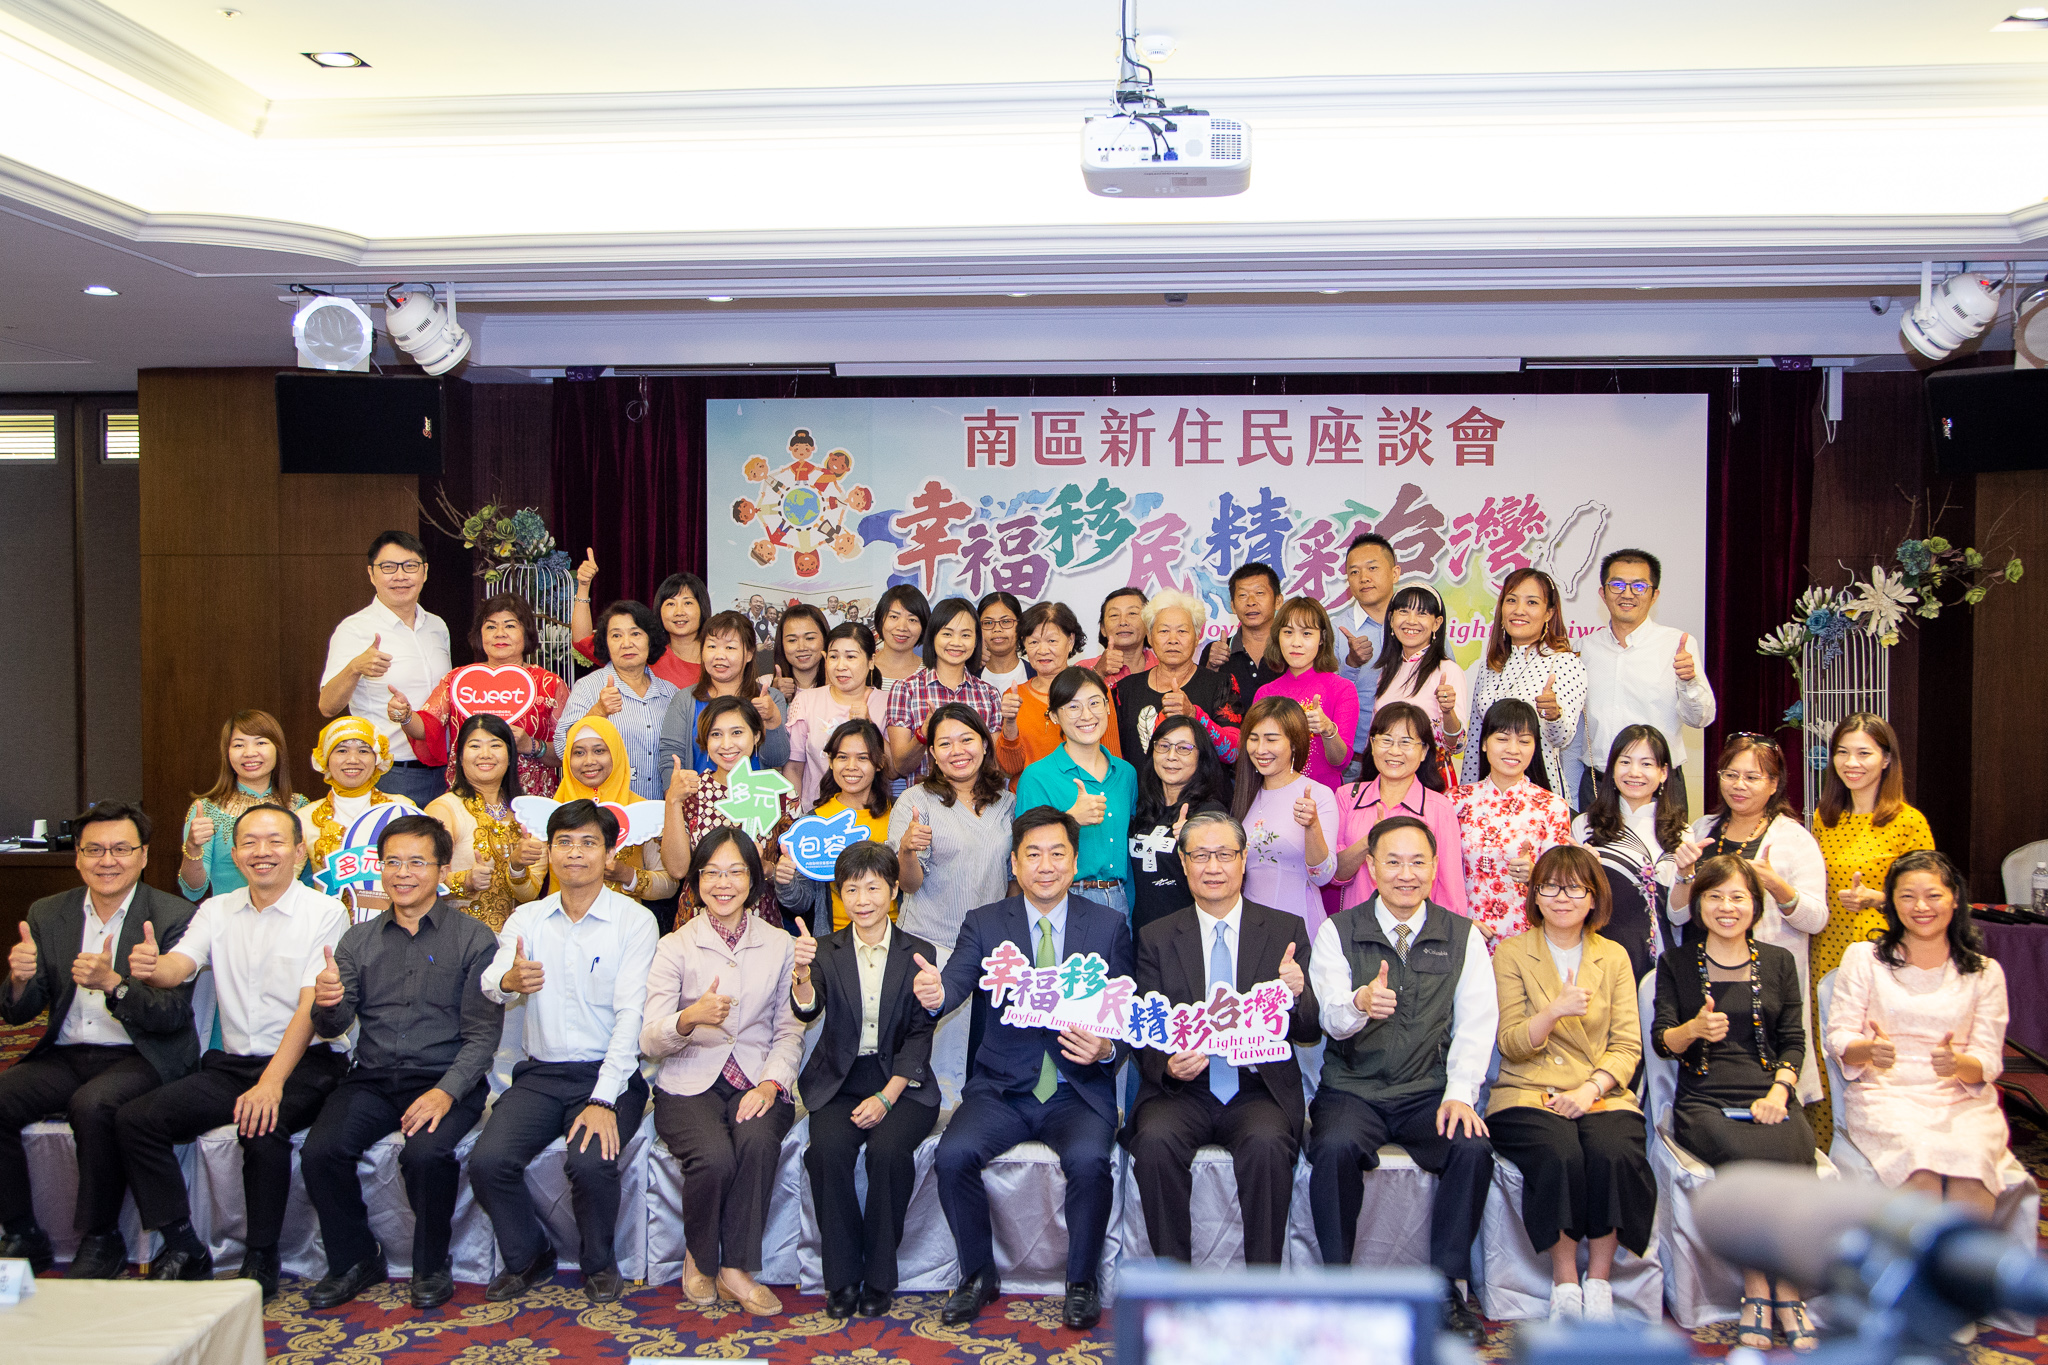 Over hundreds of new residents joined “2019 New Immigrant Seminar in Southern Area” held by NIA on 18th 